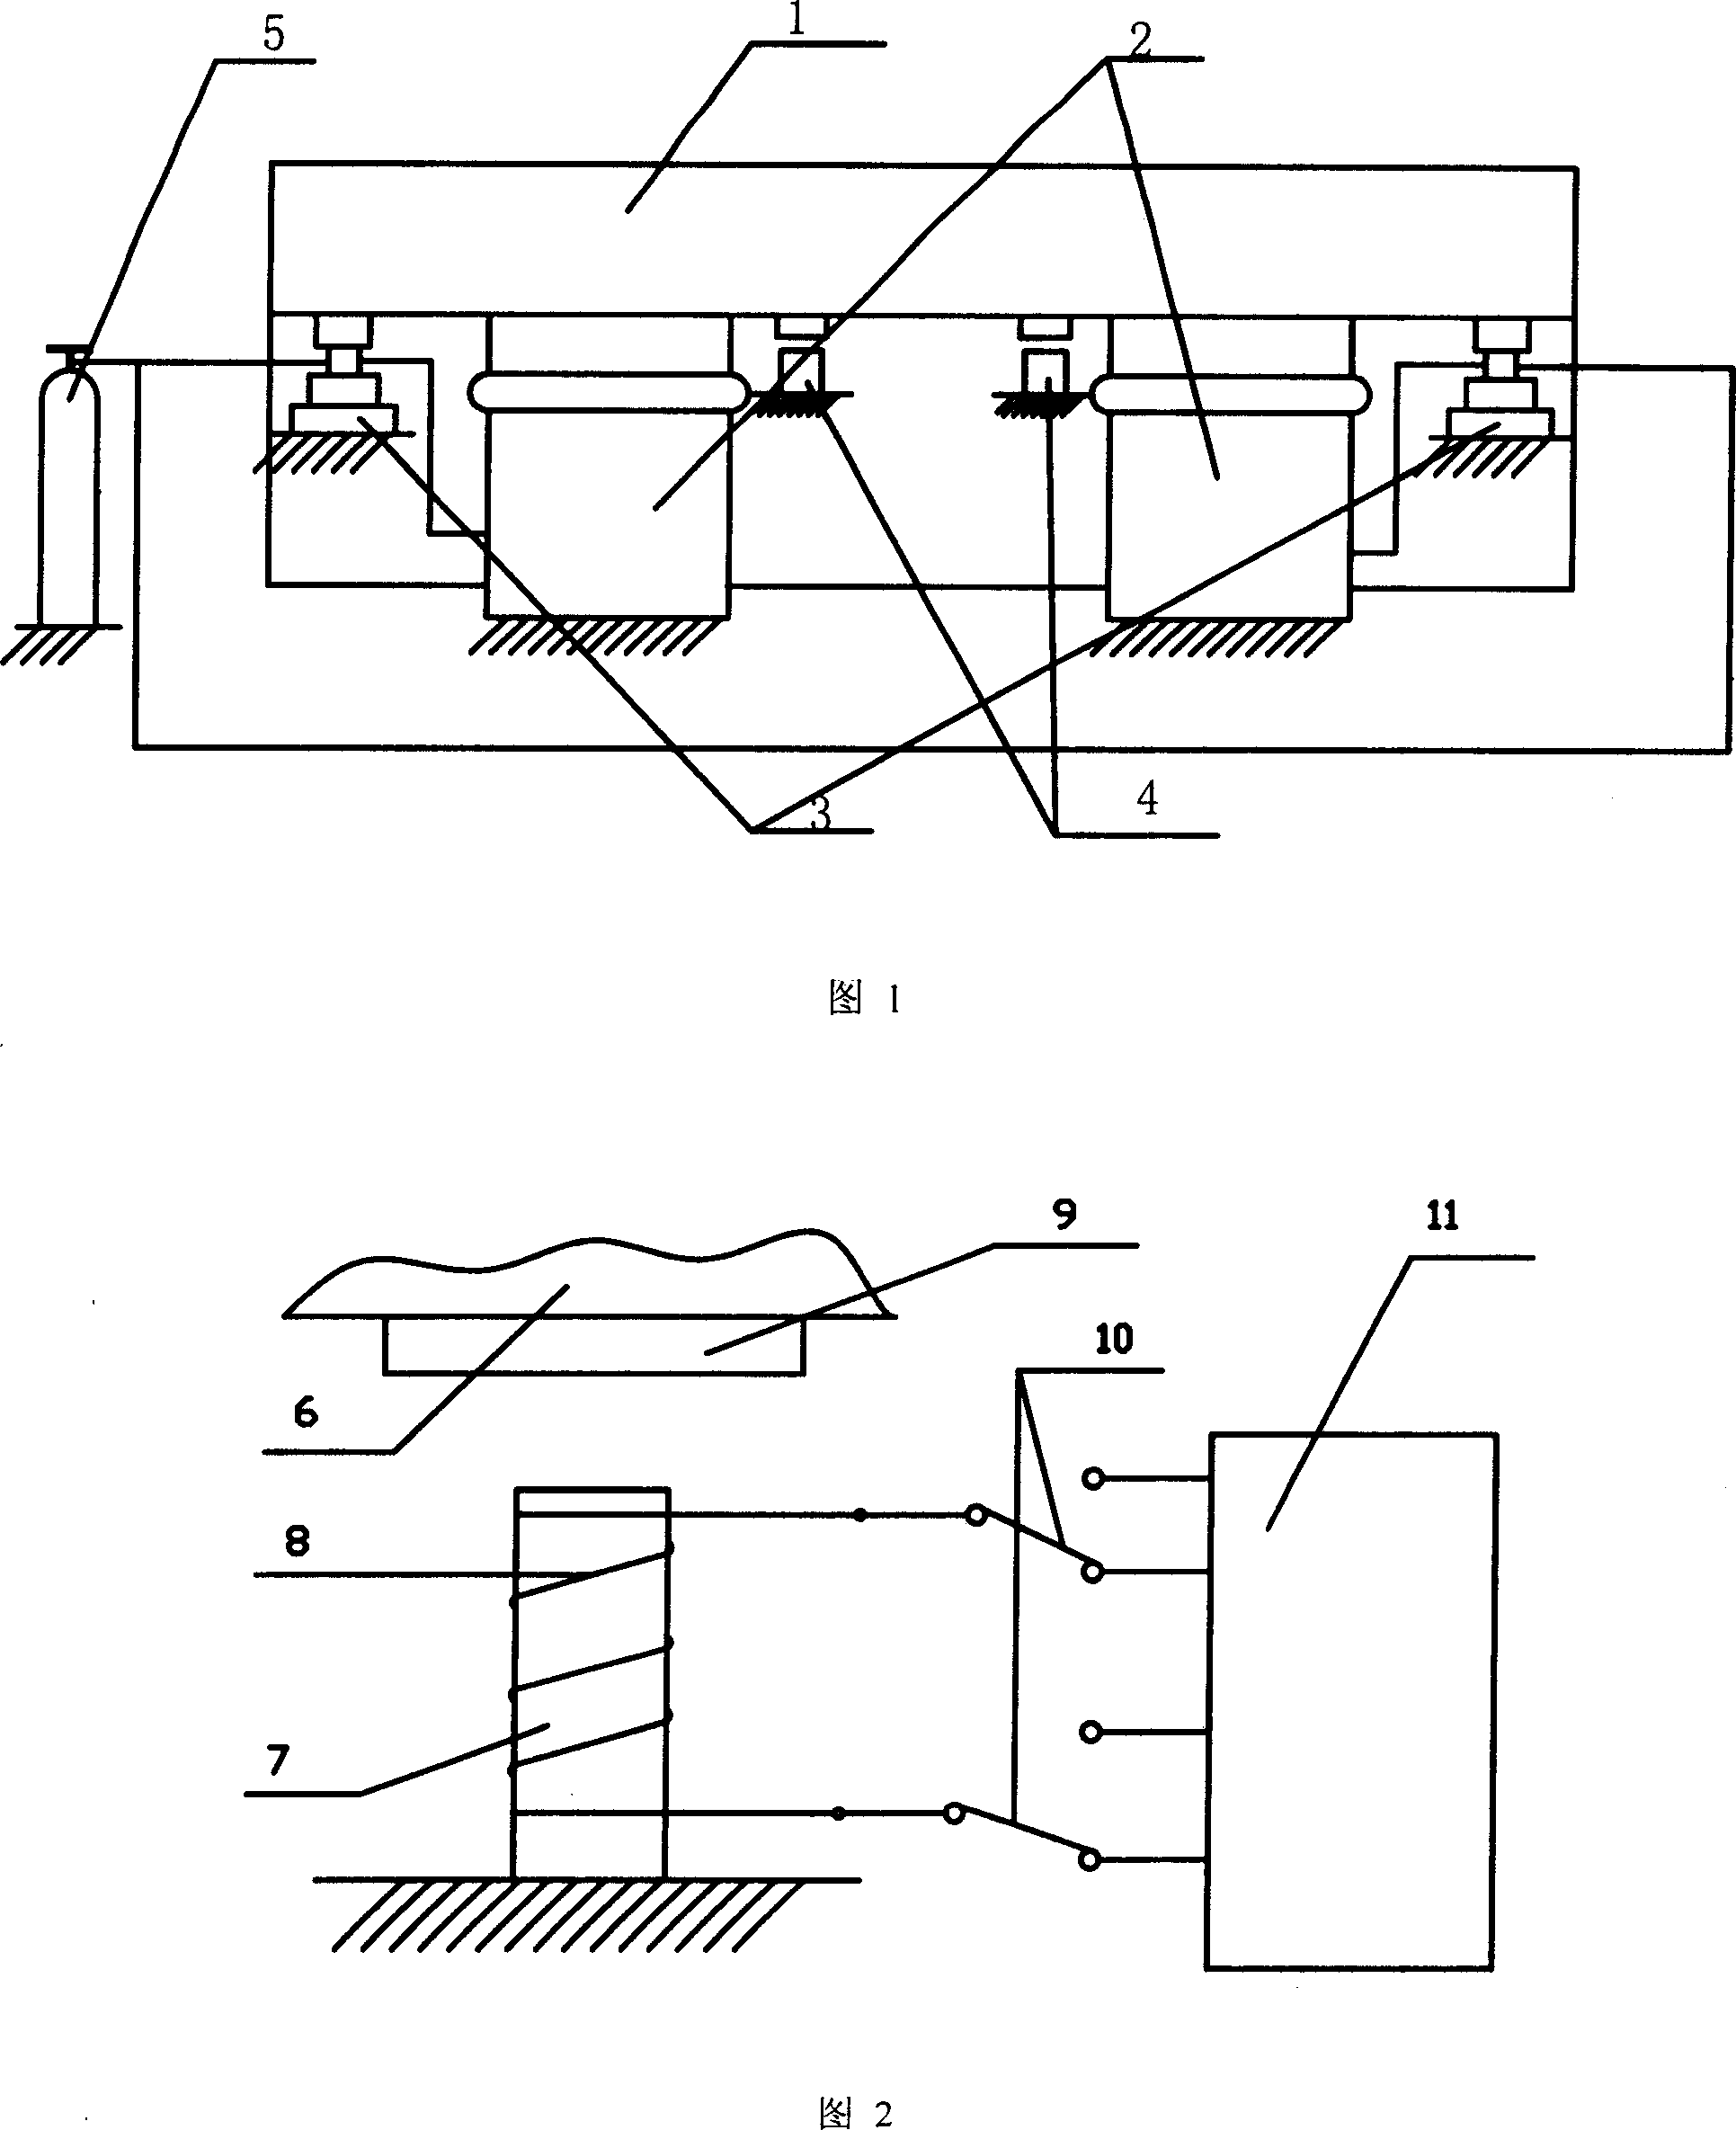 Air spring vibration isolation foundation with electromechanical damper